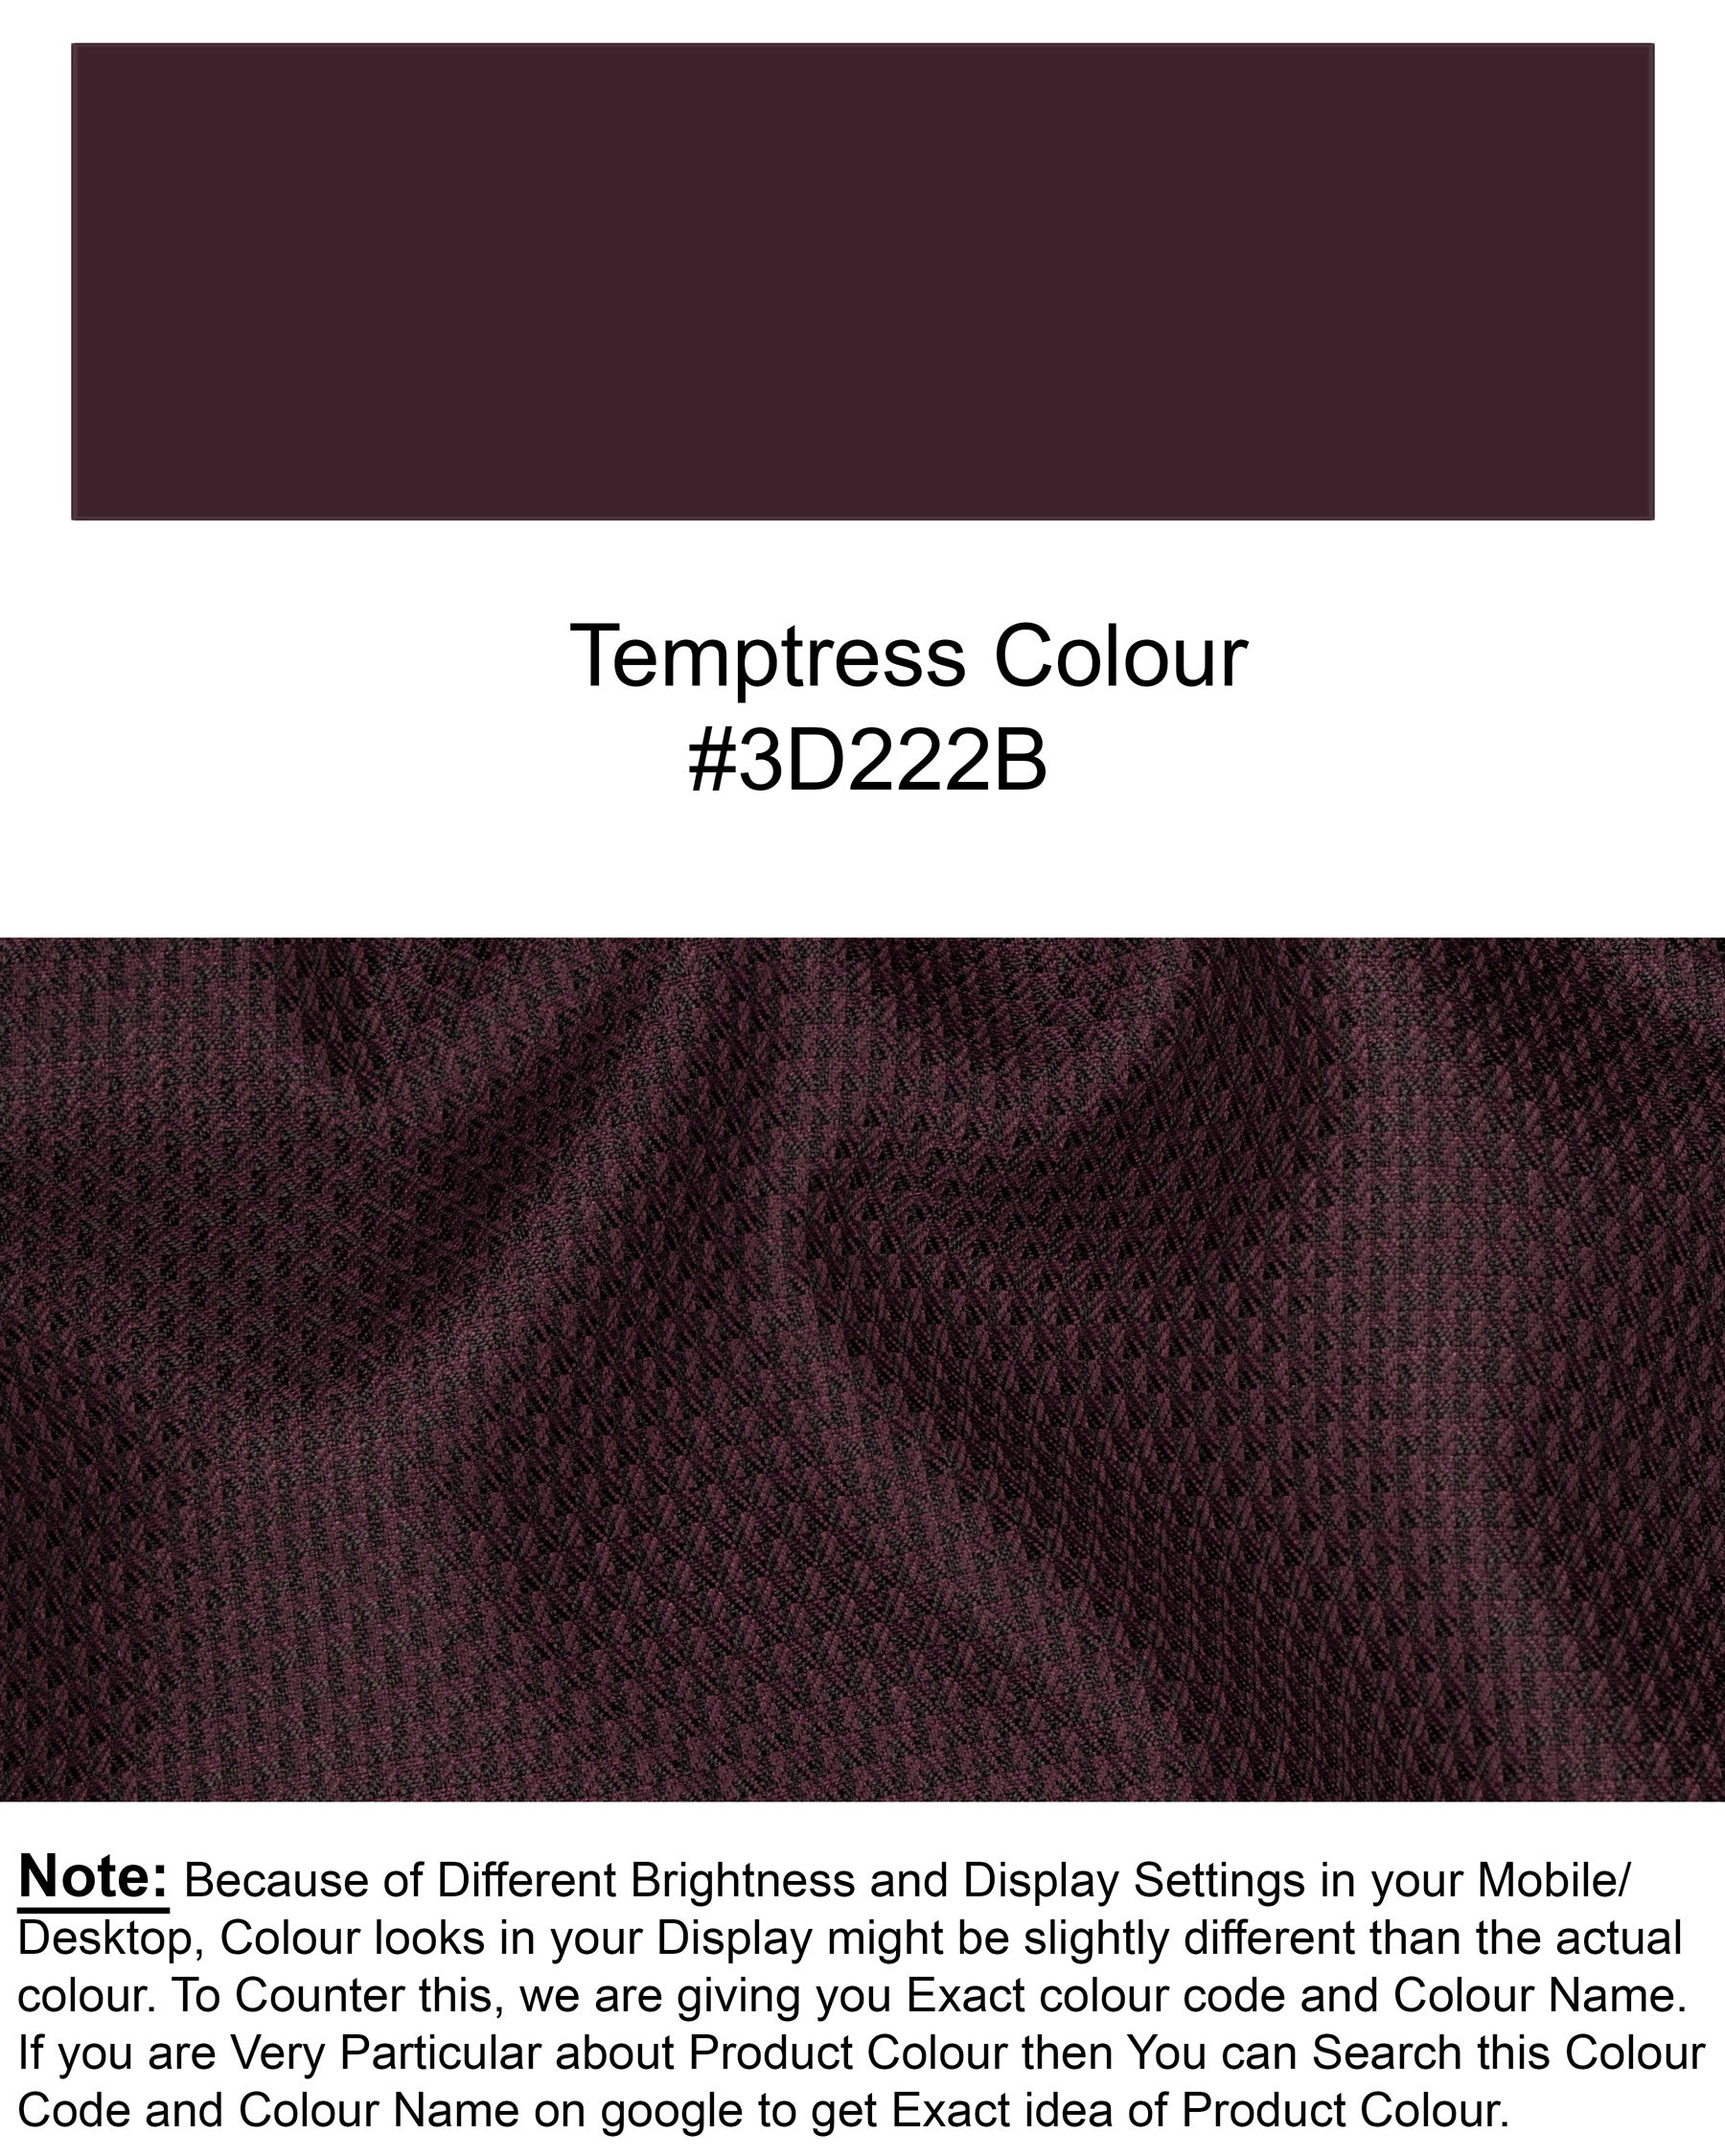 Temptress Double BreaBled Bandhgala Wool Rich Blazer BL1561-D18-36, BL1561-D18-38, BL1561-D18-40, BL1561-D18-42, BL1561-D18-44, BL1561-D18-46, BL1561-D18-48, BL1561-D18-50, BL1561-D18-52, BL1561-D18-54, BL1561-D18-56, BL1561-D18-58, BL1561-D18-60